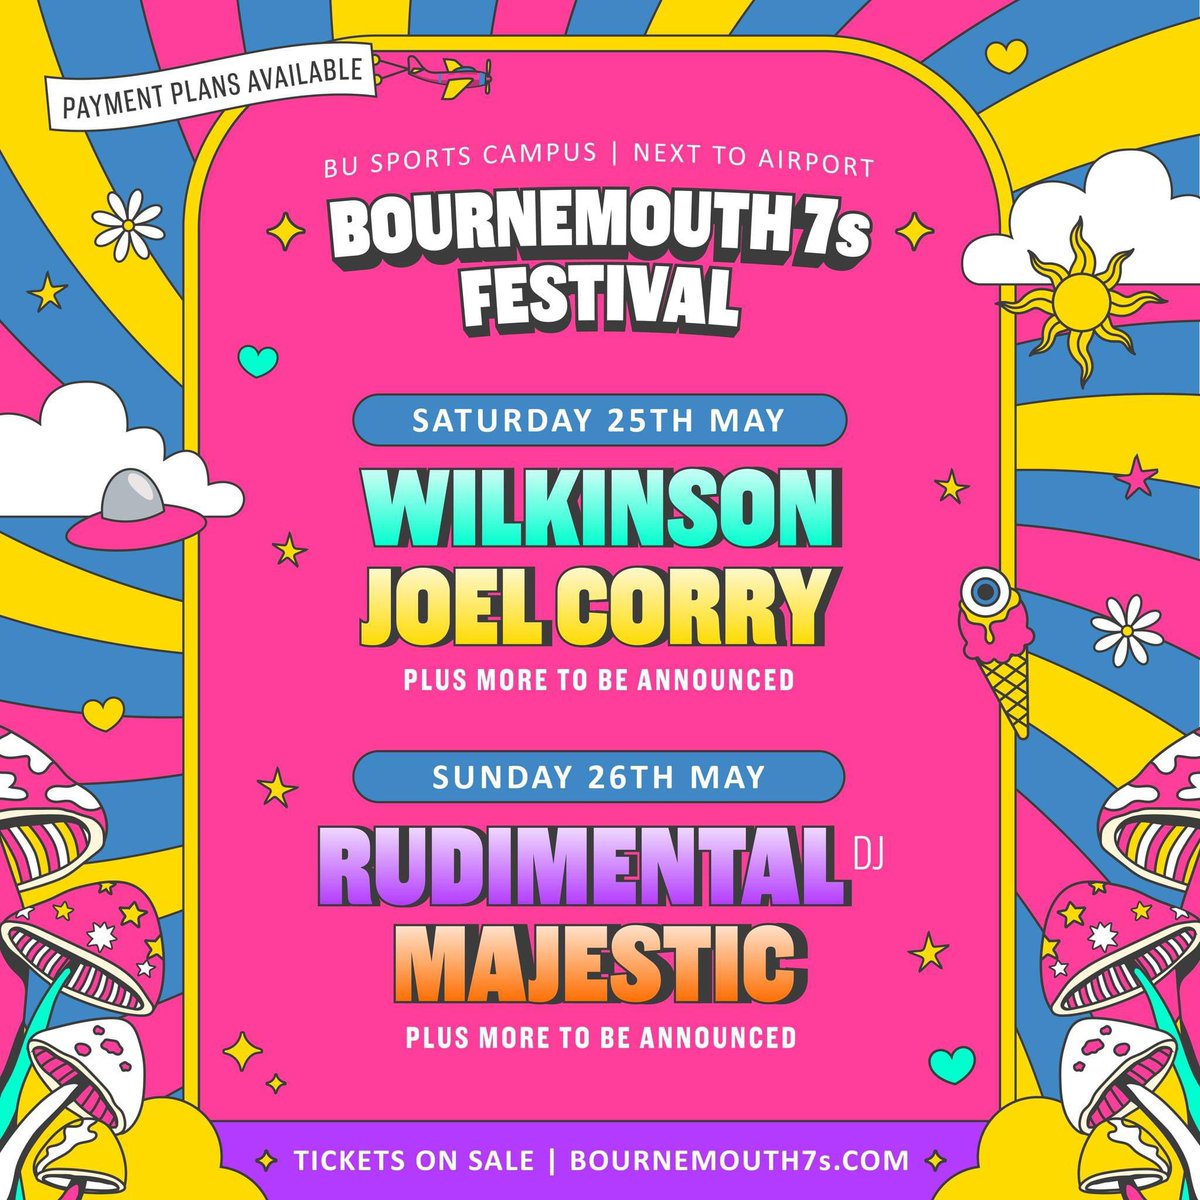 Your headliner day splits have just landed... 🚀 📆 𝗦𝗔𝗧𝗨𝗥𝗗𝗔𝗬 𝟮𝟱𝘁𝗵 𝗠𝗔𝗬 📆 @WilkinsonUK @JoelCorry + many more to be announced! 📆 𝗦𝗨𝗡𝗗𝗔𝗬 𝟮𝟲𝘁𝗵 𝗠𝗔𝗬 📆 @Rudimental @MajesticOnline + many more to be announced! bournemouth7s.com/tickets 🎟